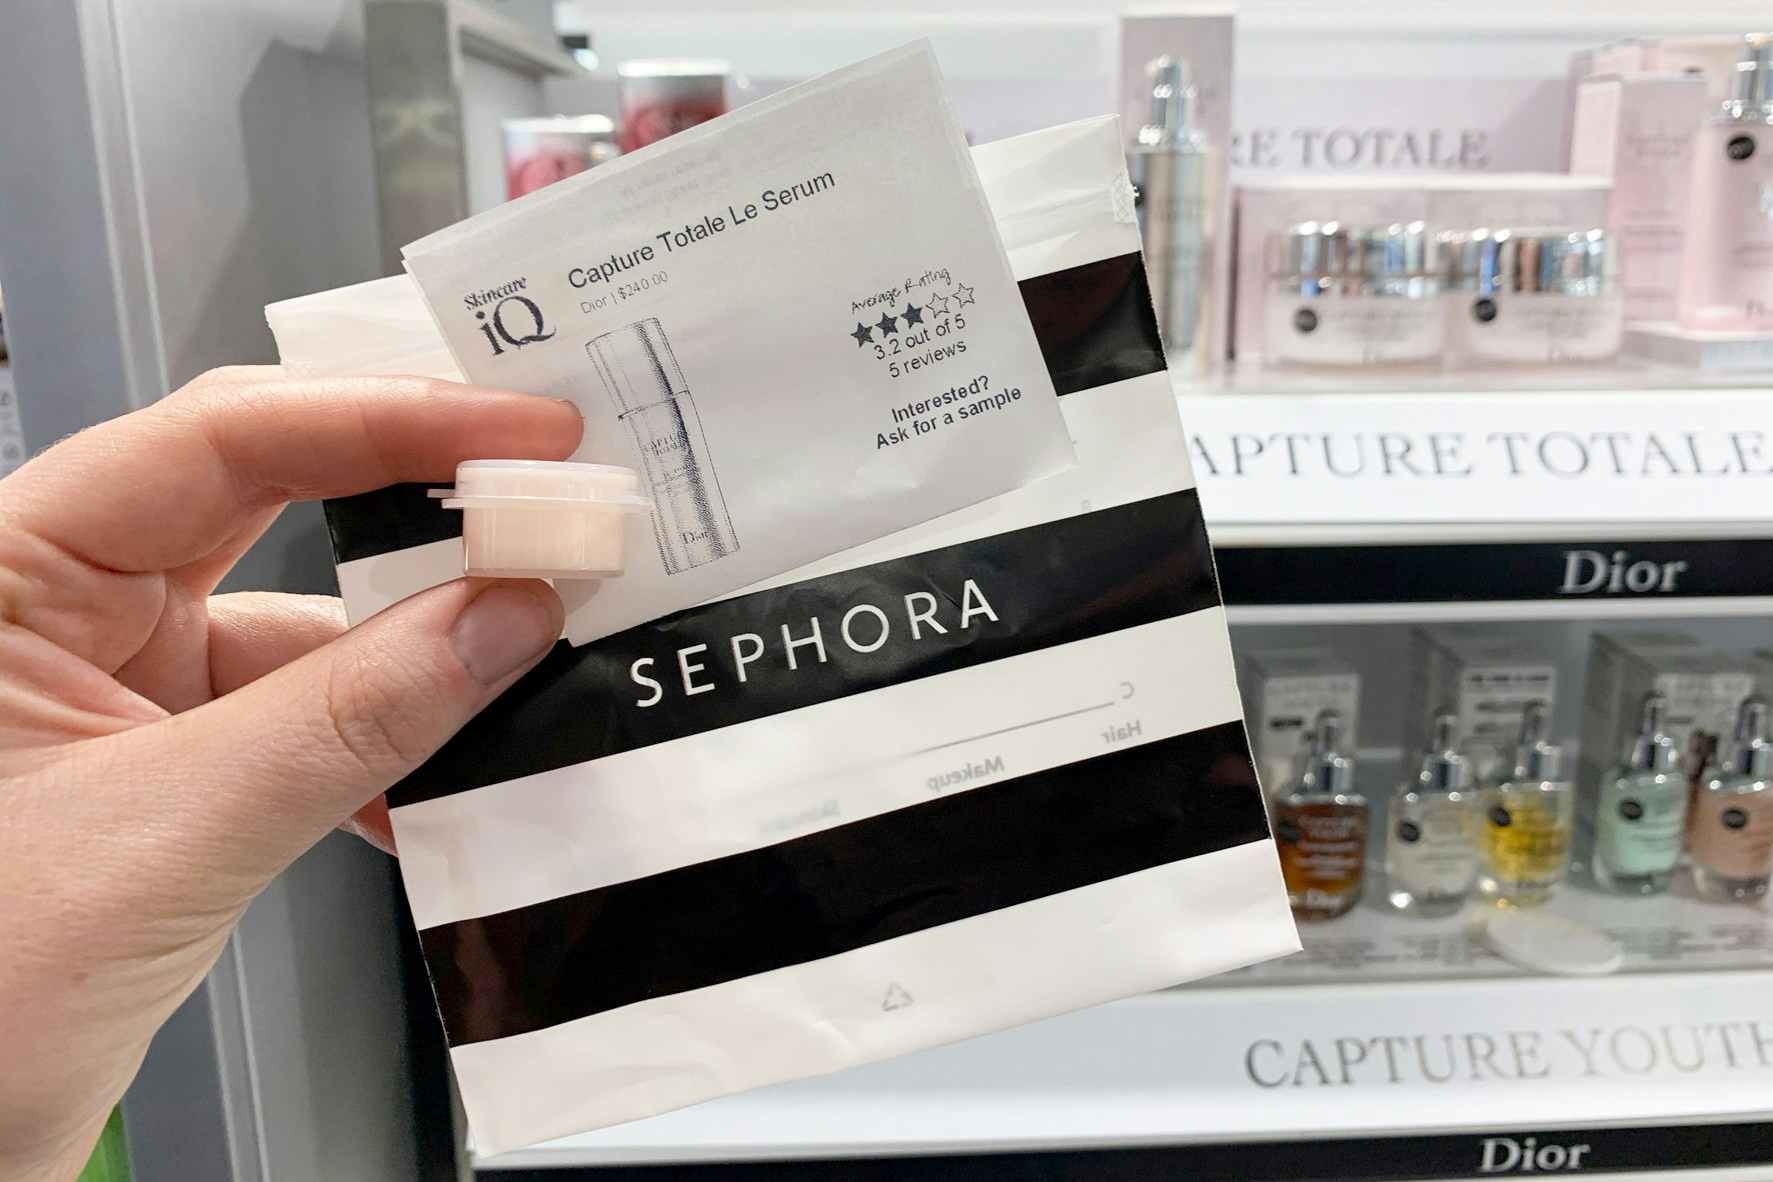 Free sample of product in Sephora.